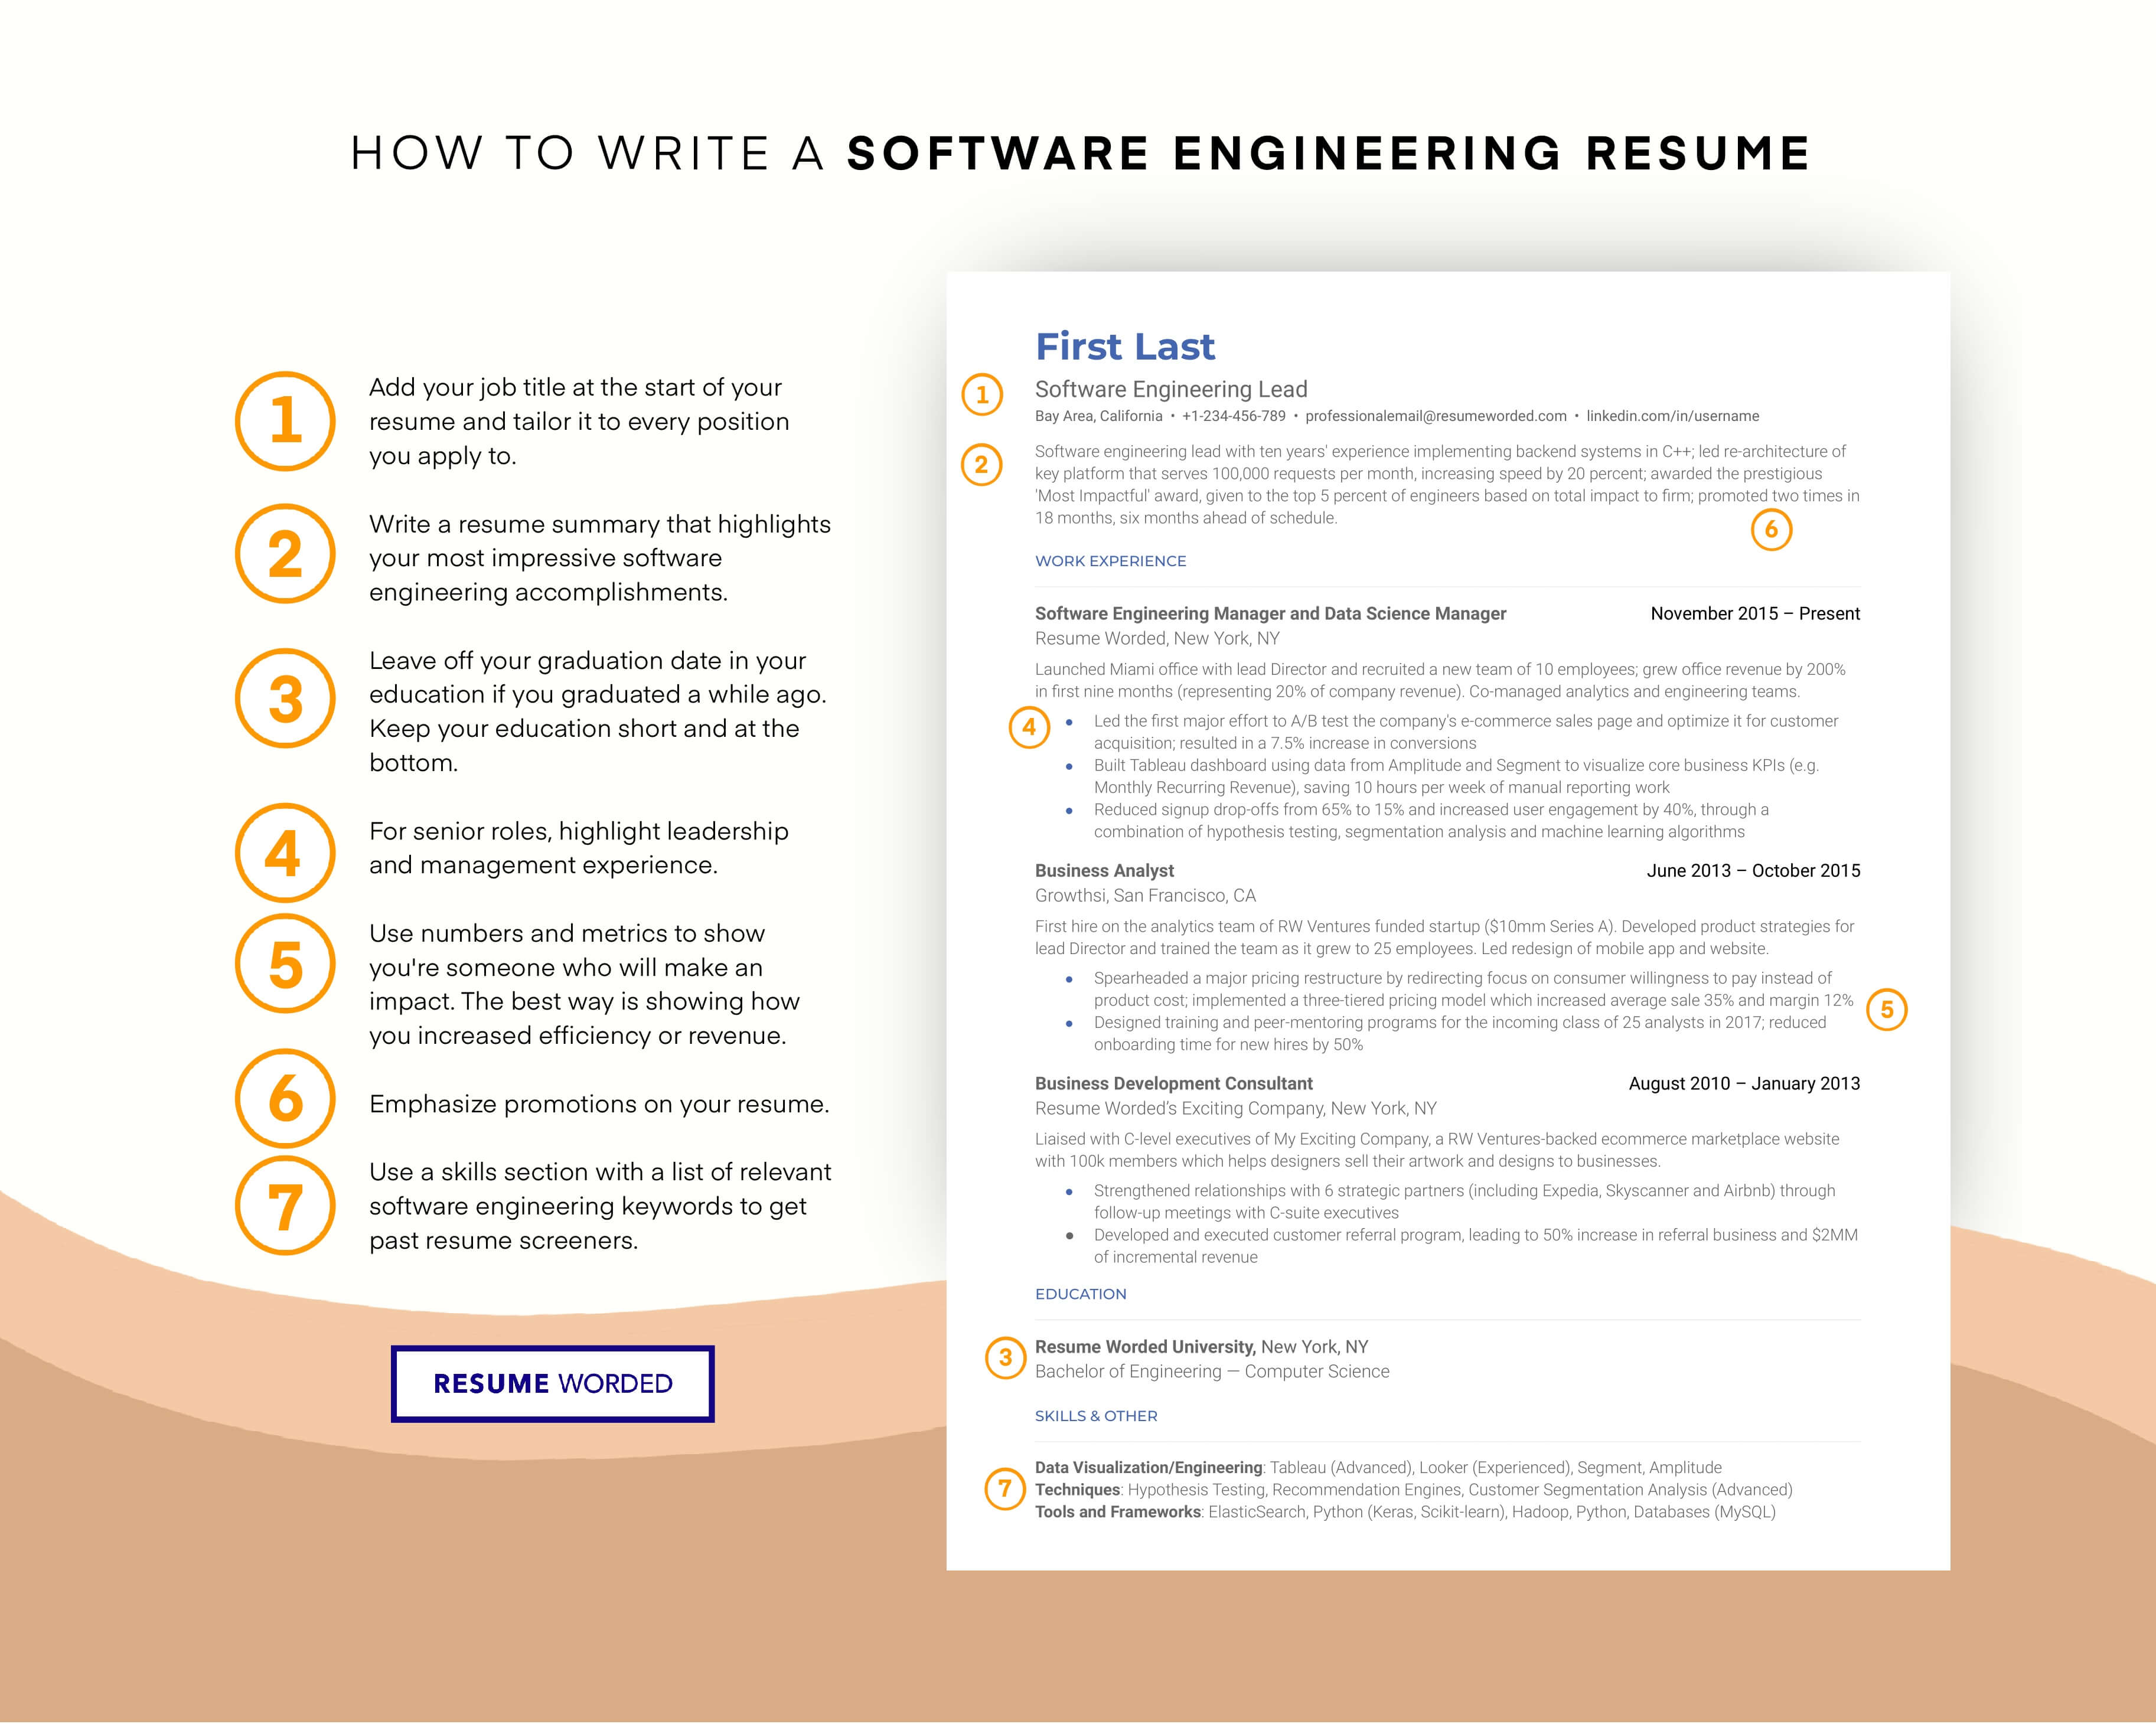 Showcase your proficiency in relevant software - Safety Design Engineer  CV